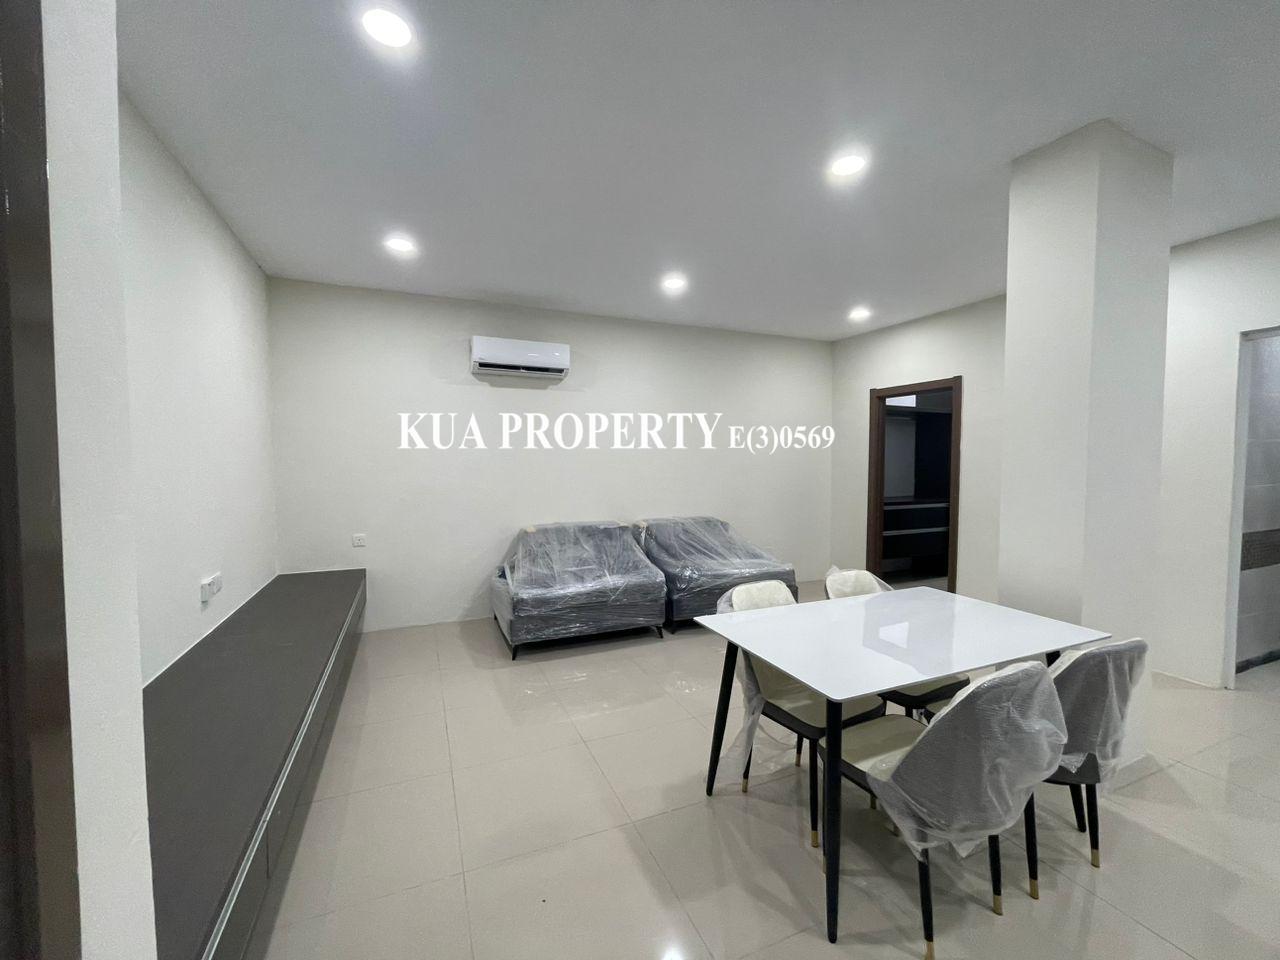 Satria Residence apartment For Rent! Located at Jalan Wan Alwi